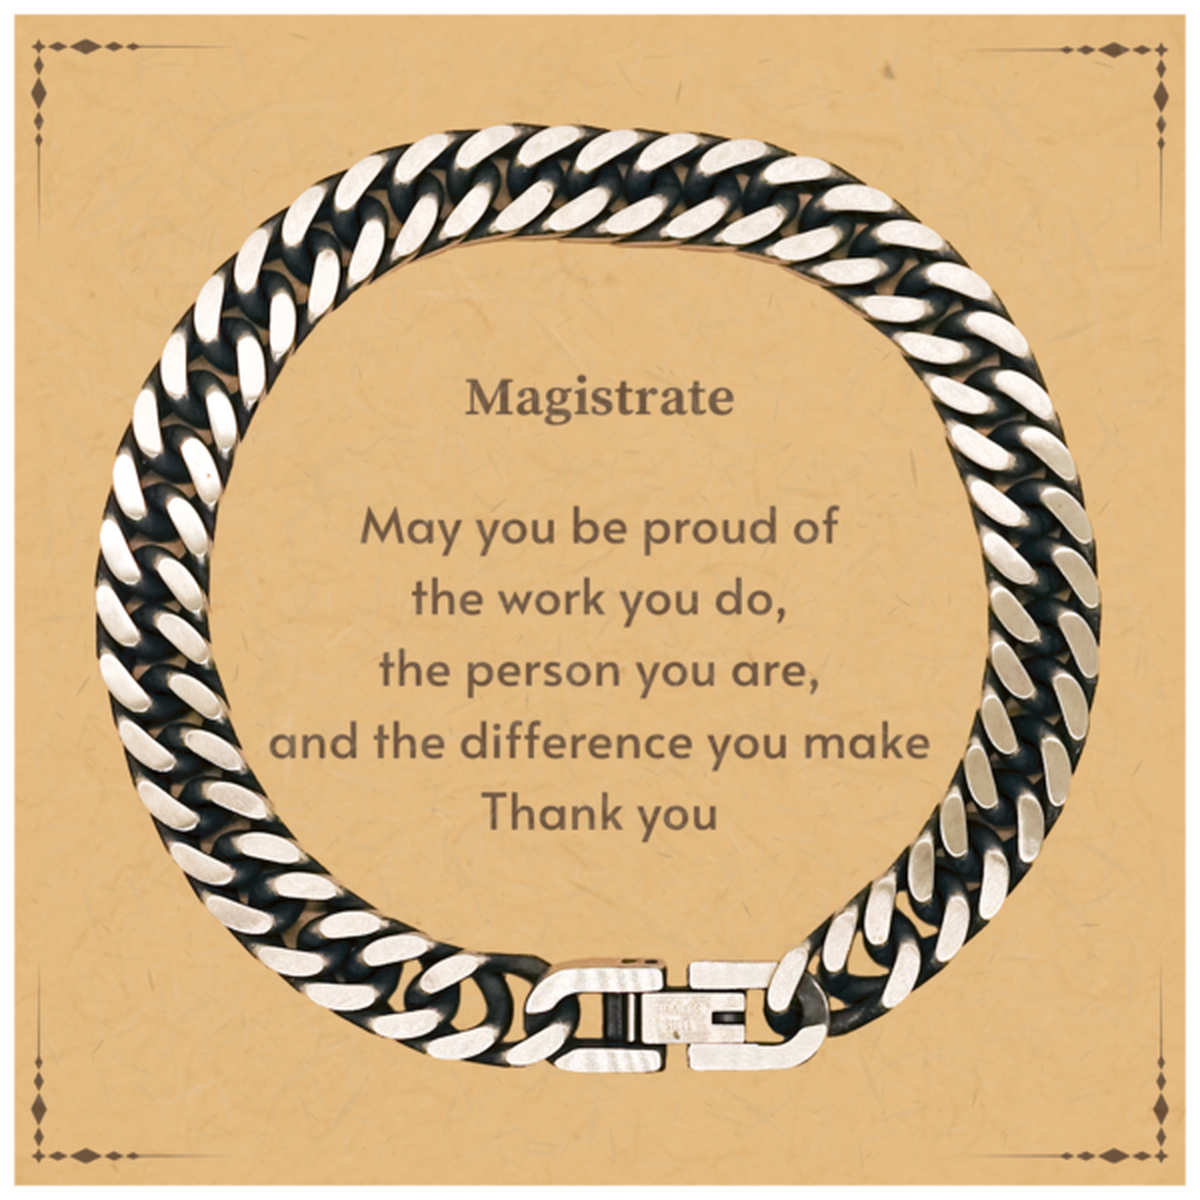 Heartwarming Cuban Link Chain Bracelet Retirement Coworkers Gifts for Magistrate, Magistrate May You be proud of the work you do, the person you are Gifts for Boss Men Women Friends